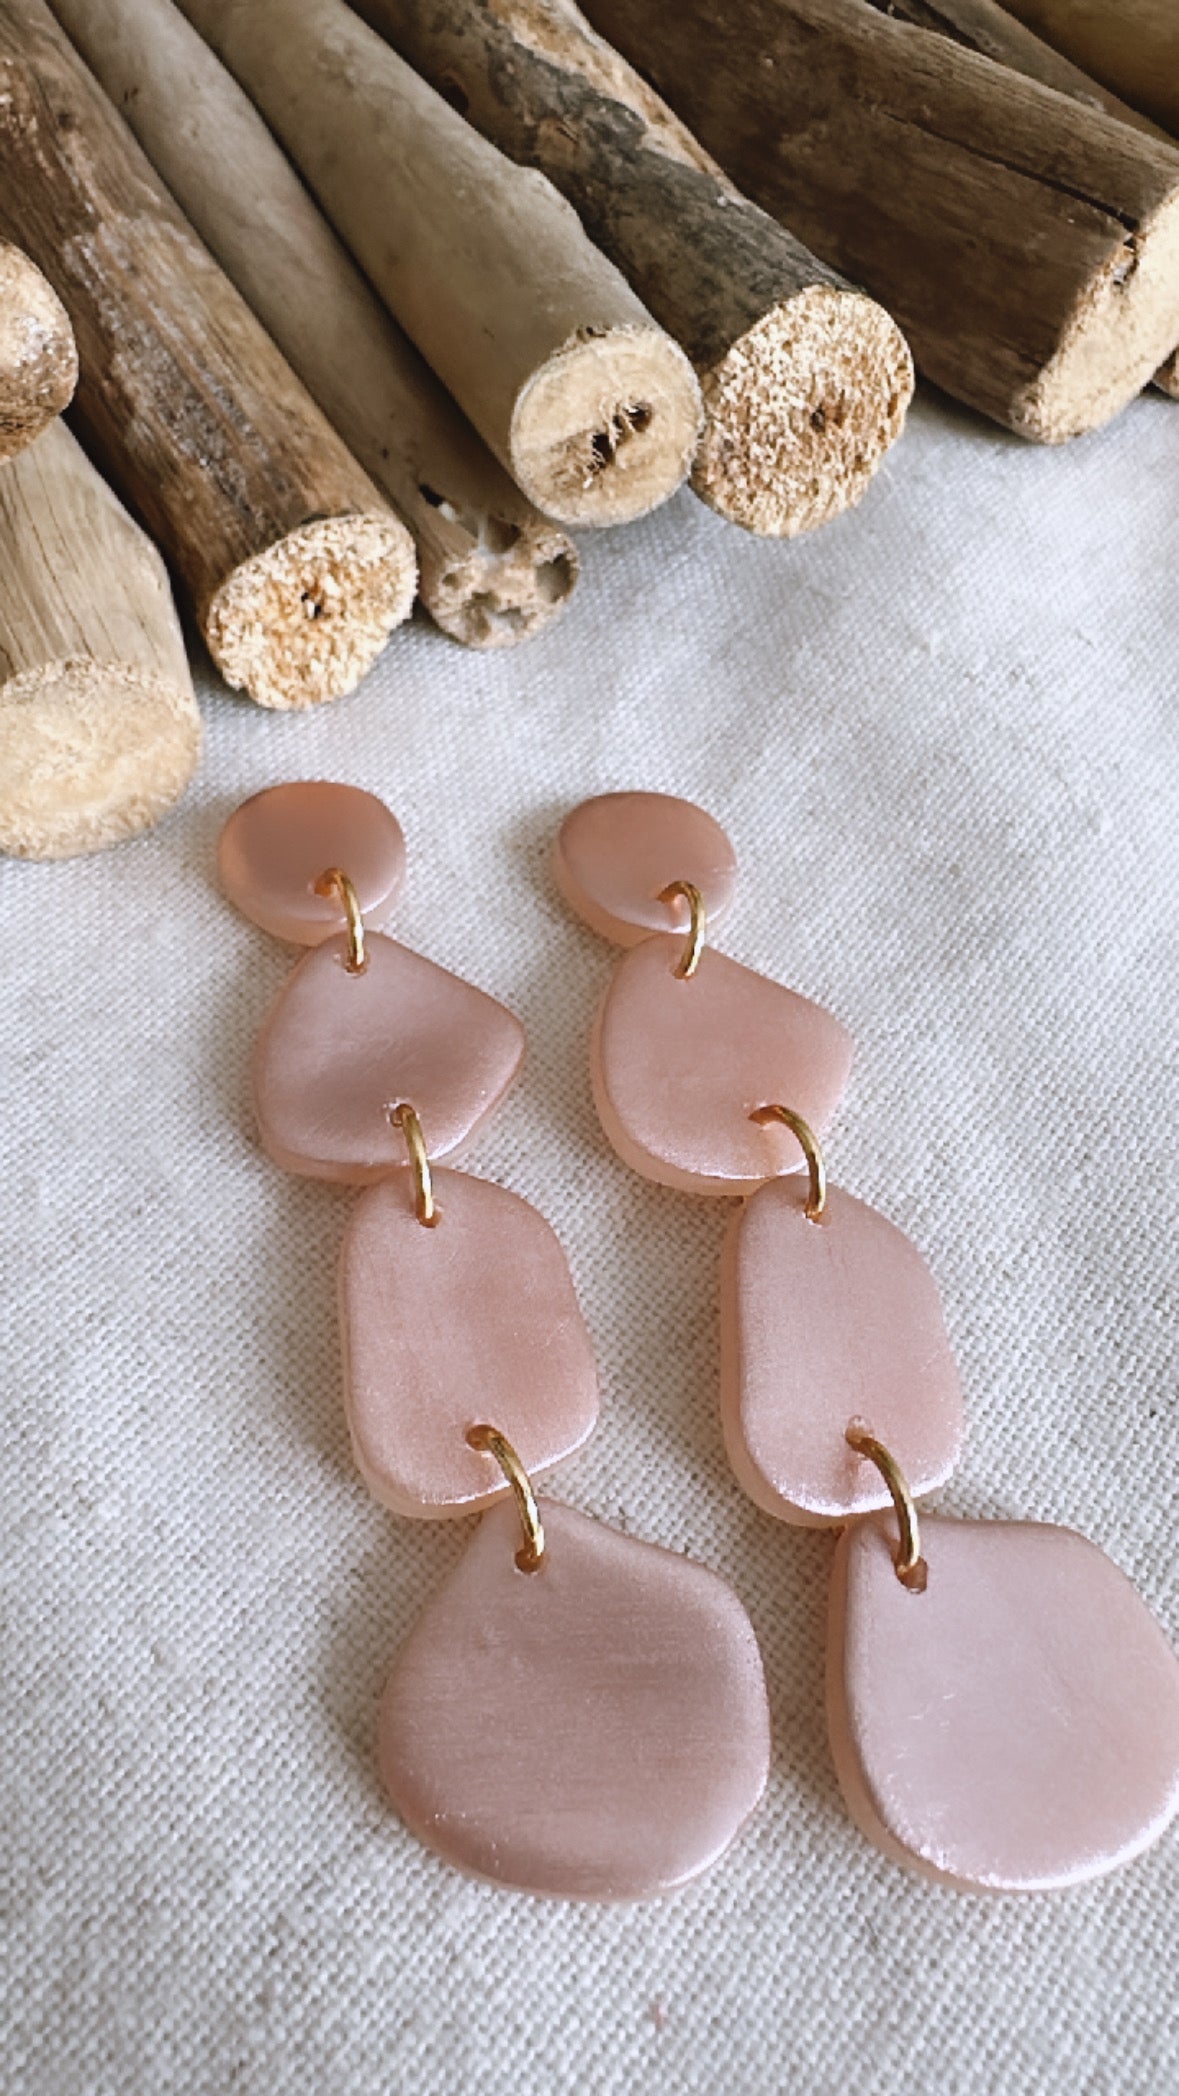 The Reflection Collection - Charlie (medium) - Clay Earrings